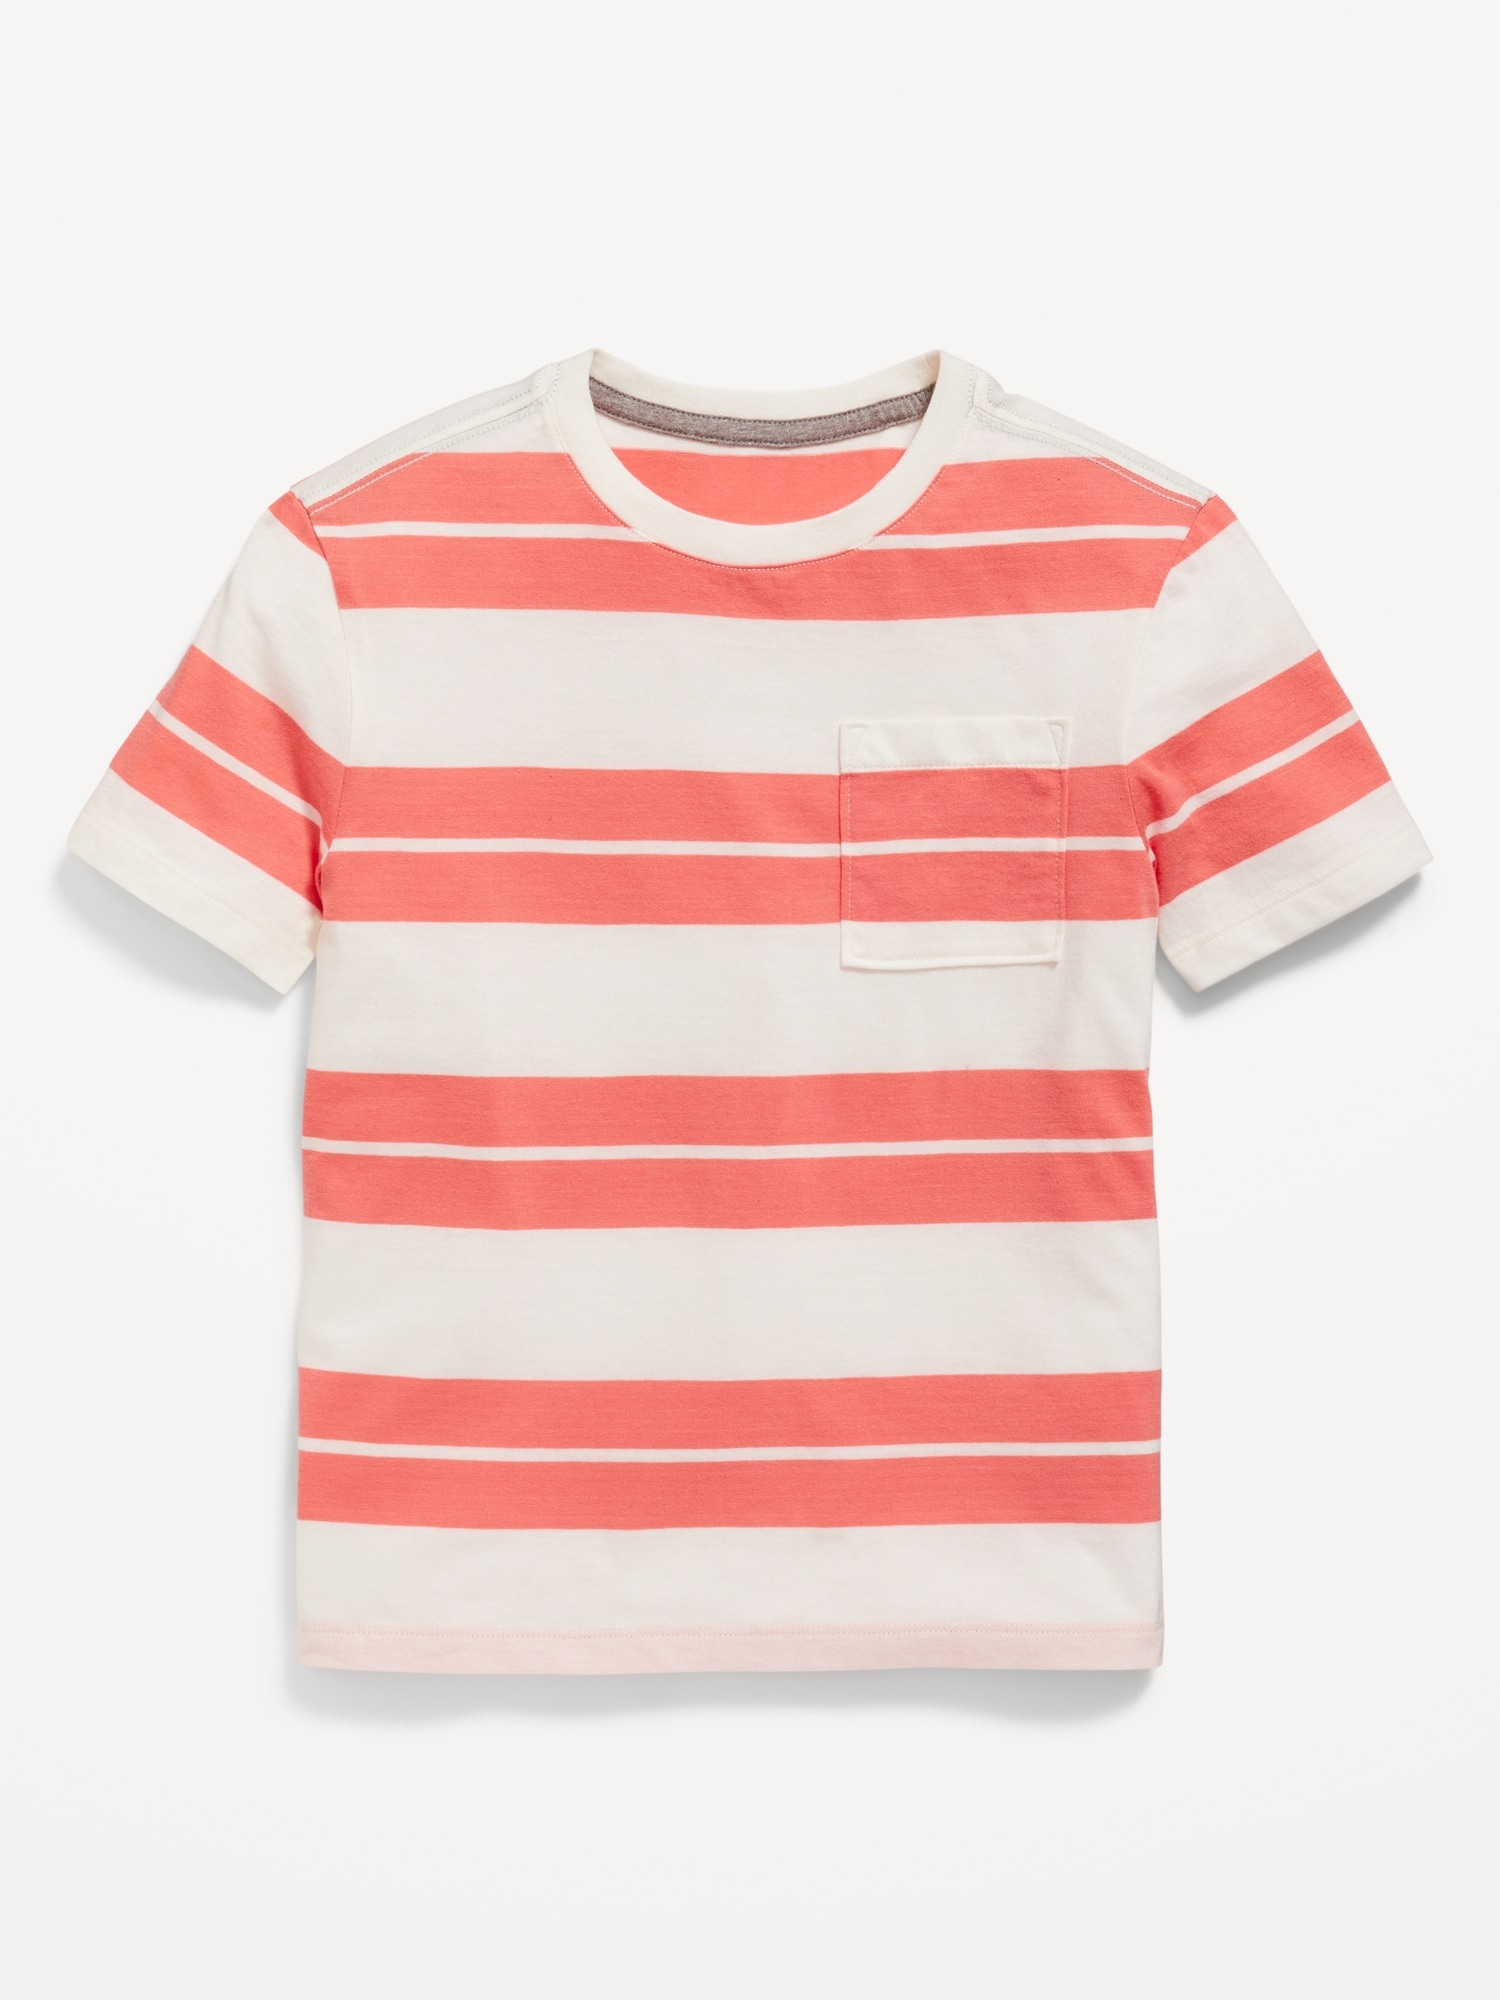 Old Navy Softest Short-Sleeve Striped Pocket T-Shirt for Boys red. 1